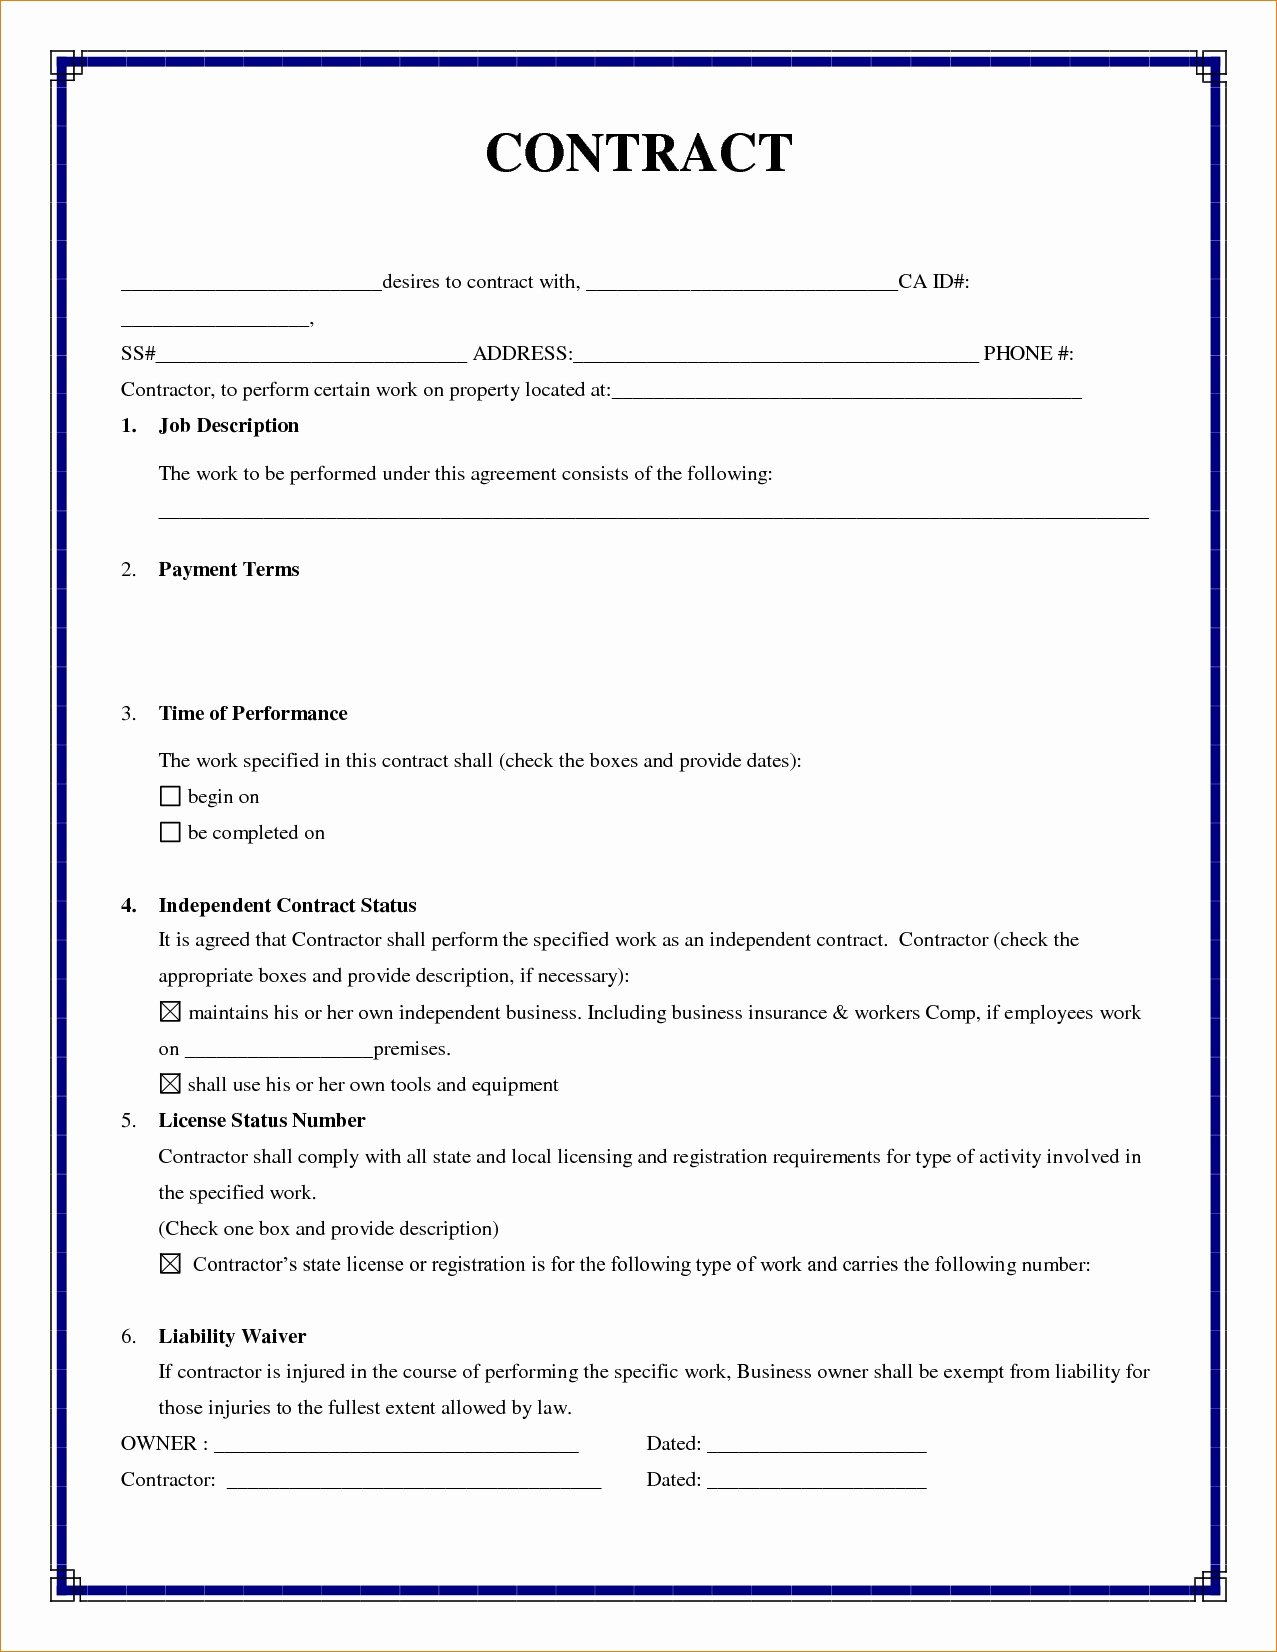 Free Roofing Contract Template Awesome Simple Contract Agreement